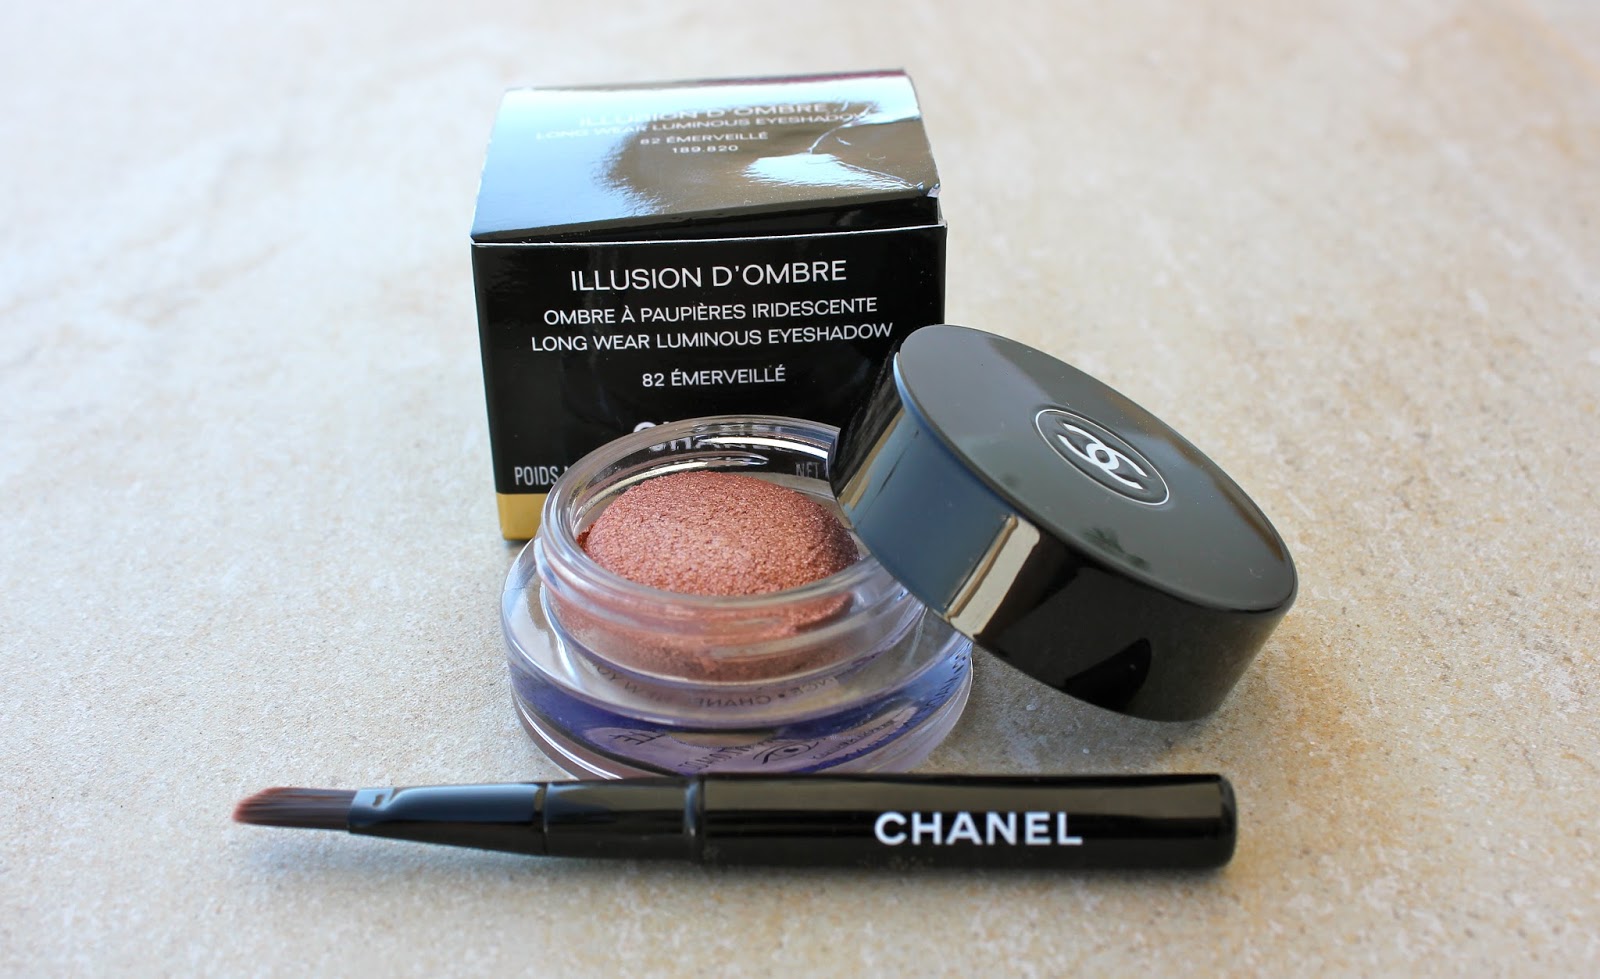 Beauty She Wrote - Beauty Blog: Chanel Illusion D'ombre - Emerveille